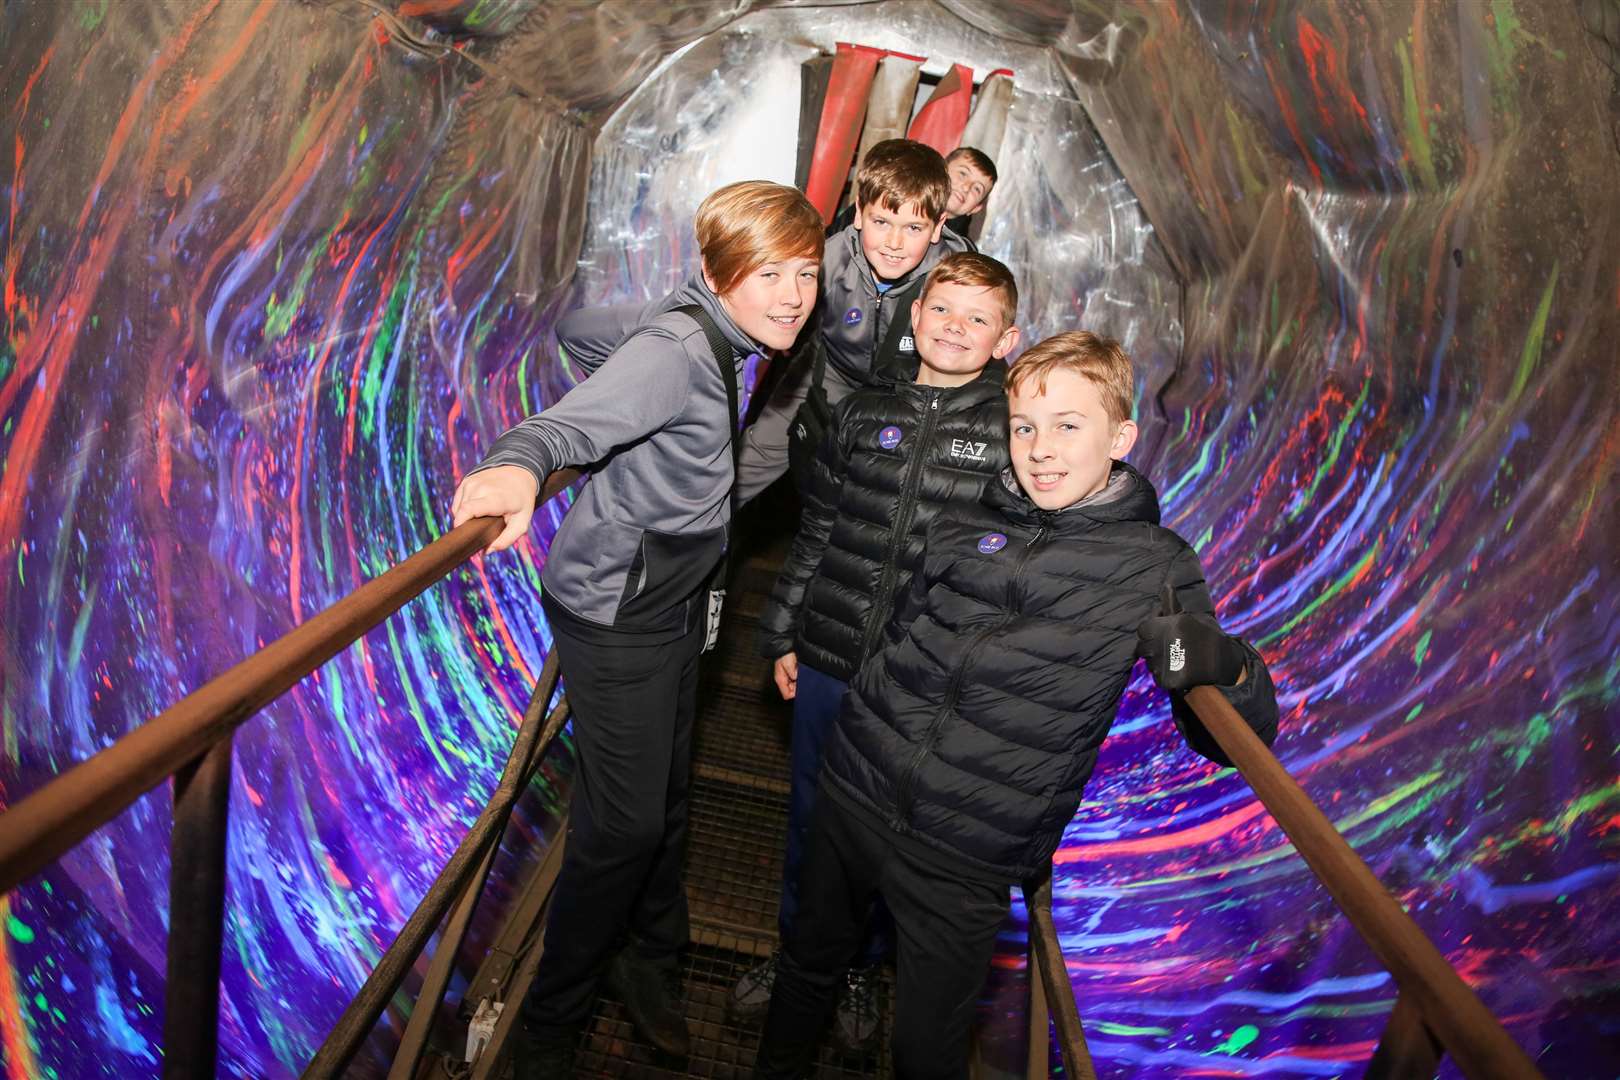 Harrison Pyle, 12, Cameron Pyle, nine, Will Brazier, 11, Oscar Coe, 11, and Jake Ottley, 11, in the spinning room Picture: Matthew Walker (19829907)